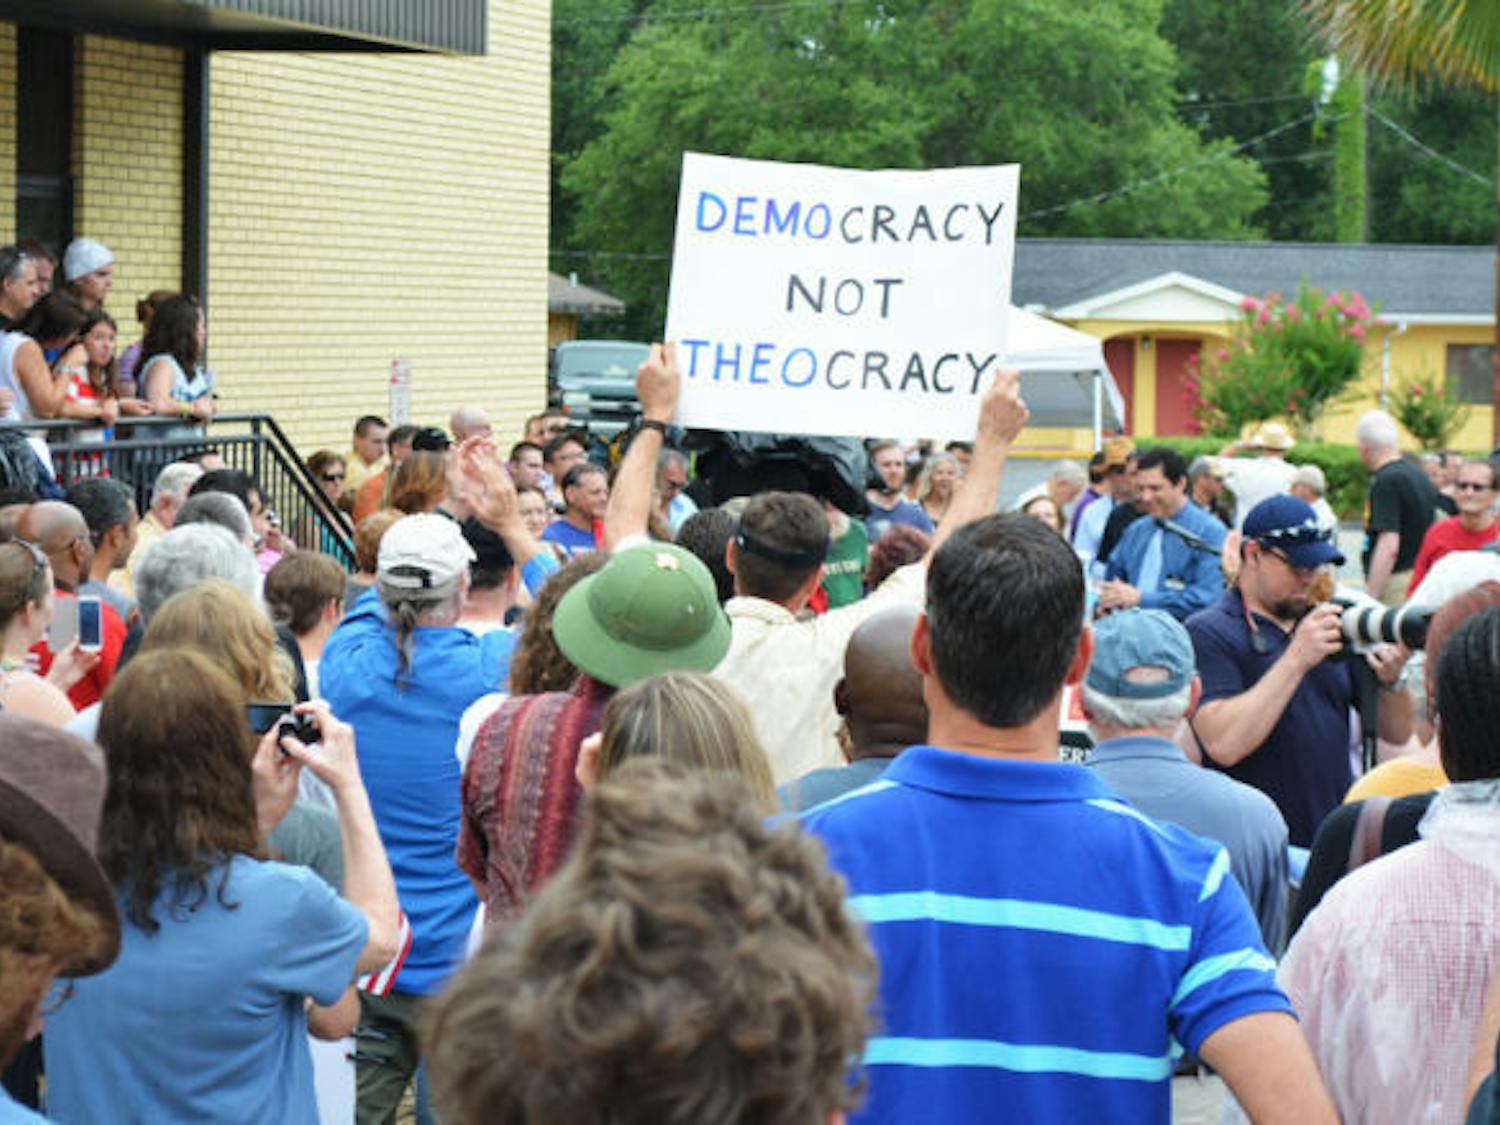 Crowds gather in front of the Bradford County Courthouse on Saturday, June 29, for the unveiling of an atheist monument near a monument of the Ten Commandments in Starke, Fla.